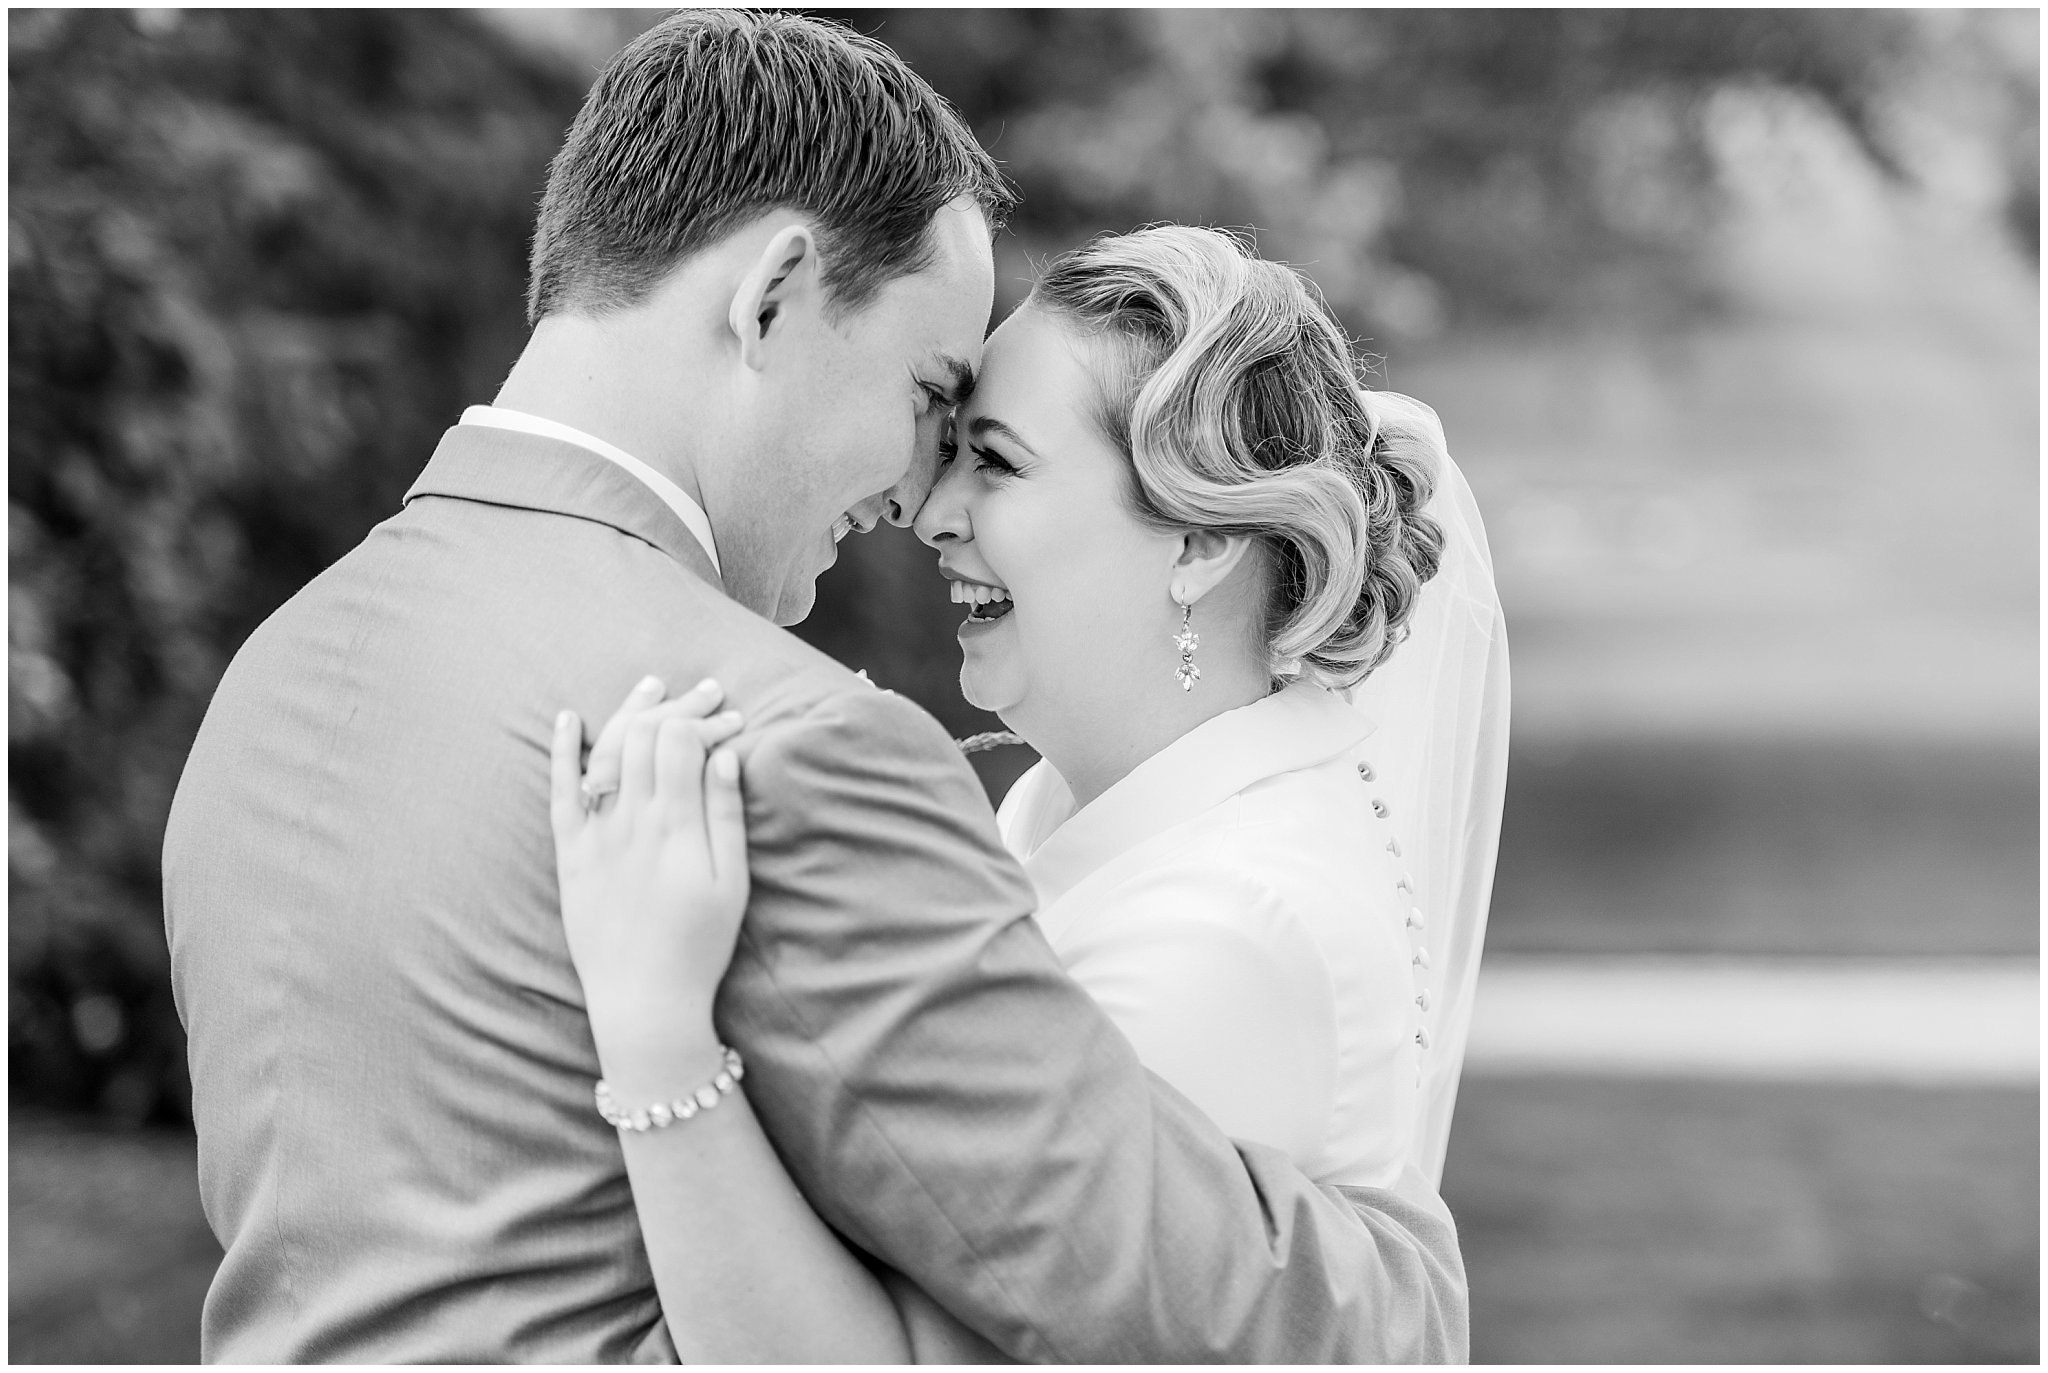 Bride and groom vintage formal bridal session at Thanksgiving Point | Thanksgiving Point Summer Formal Session | Jessie and Dallin Photography